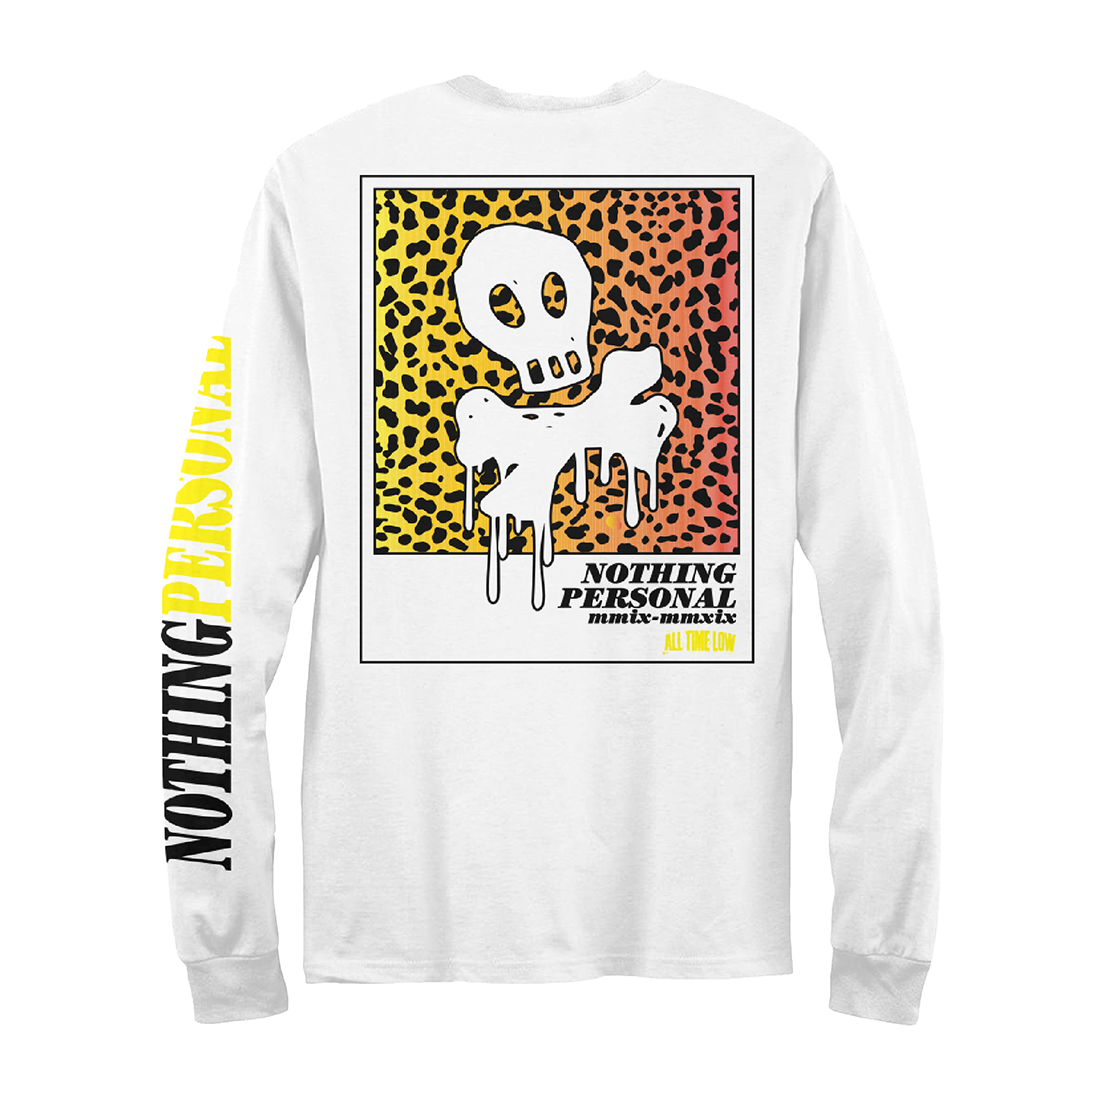 Nothing Personal Leopard Skull and Bones Long Sleeve (White)